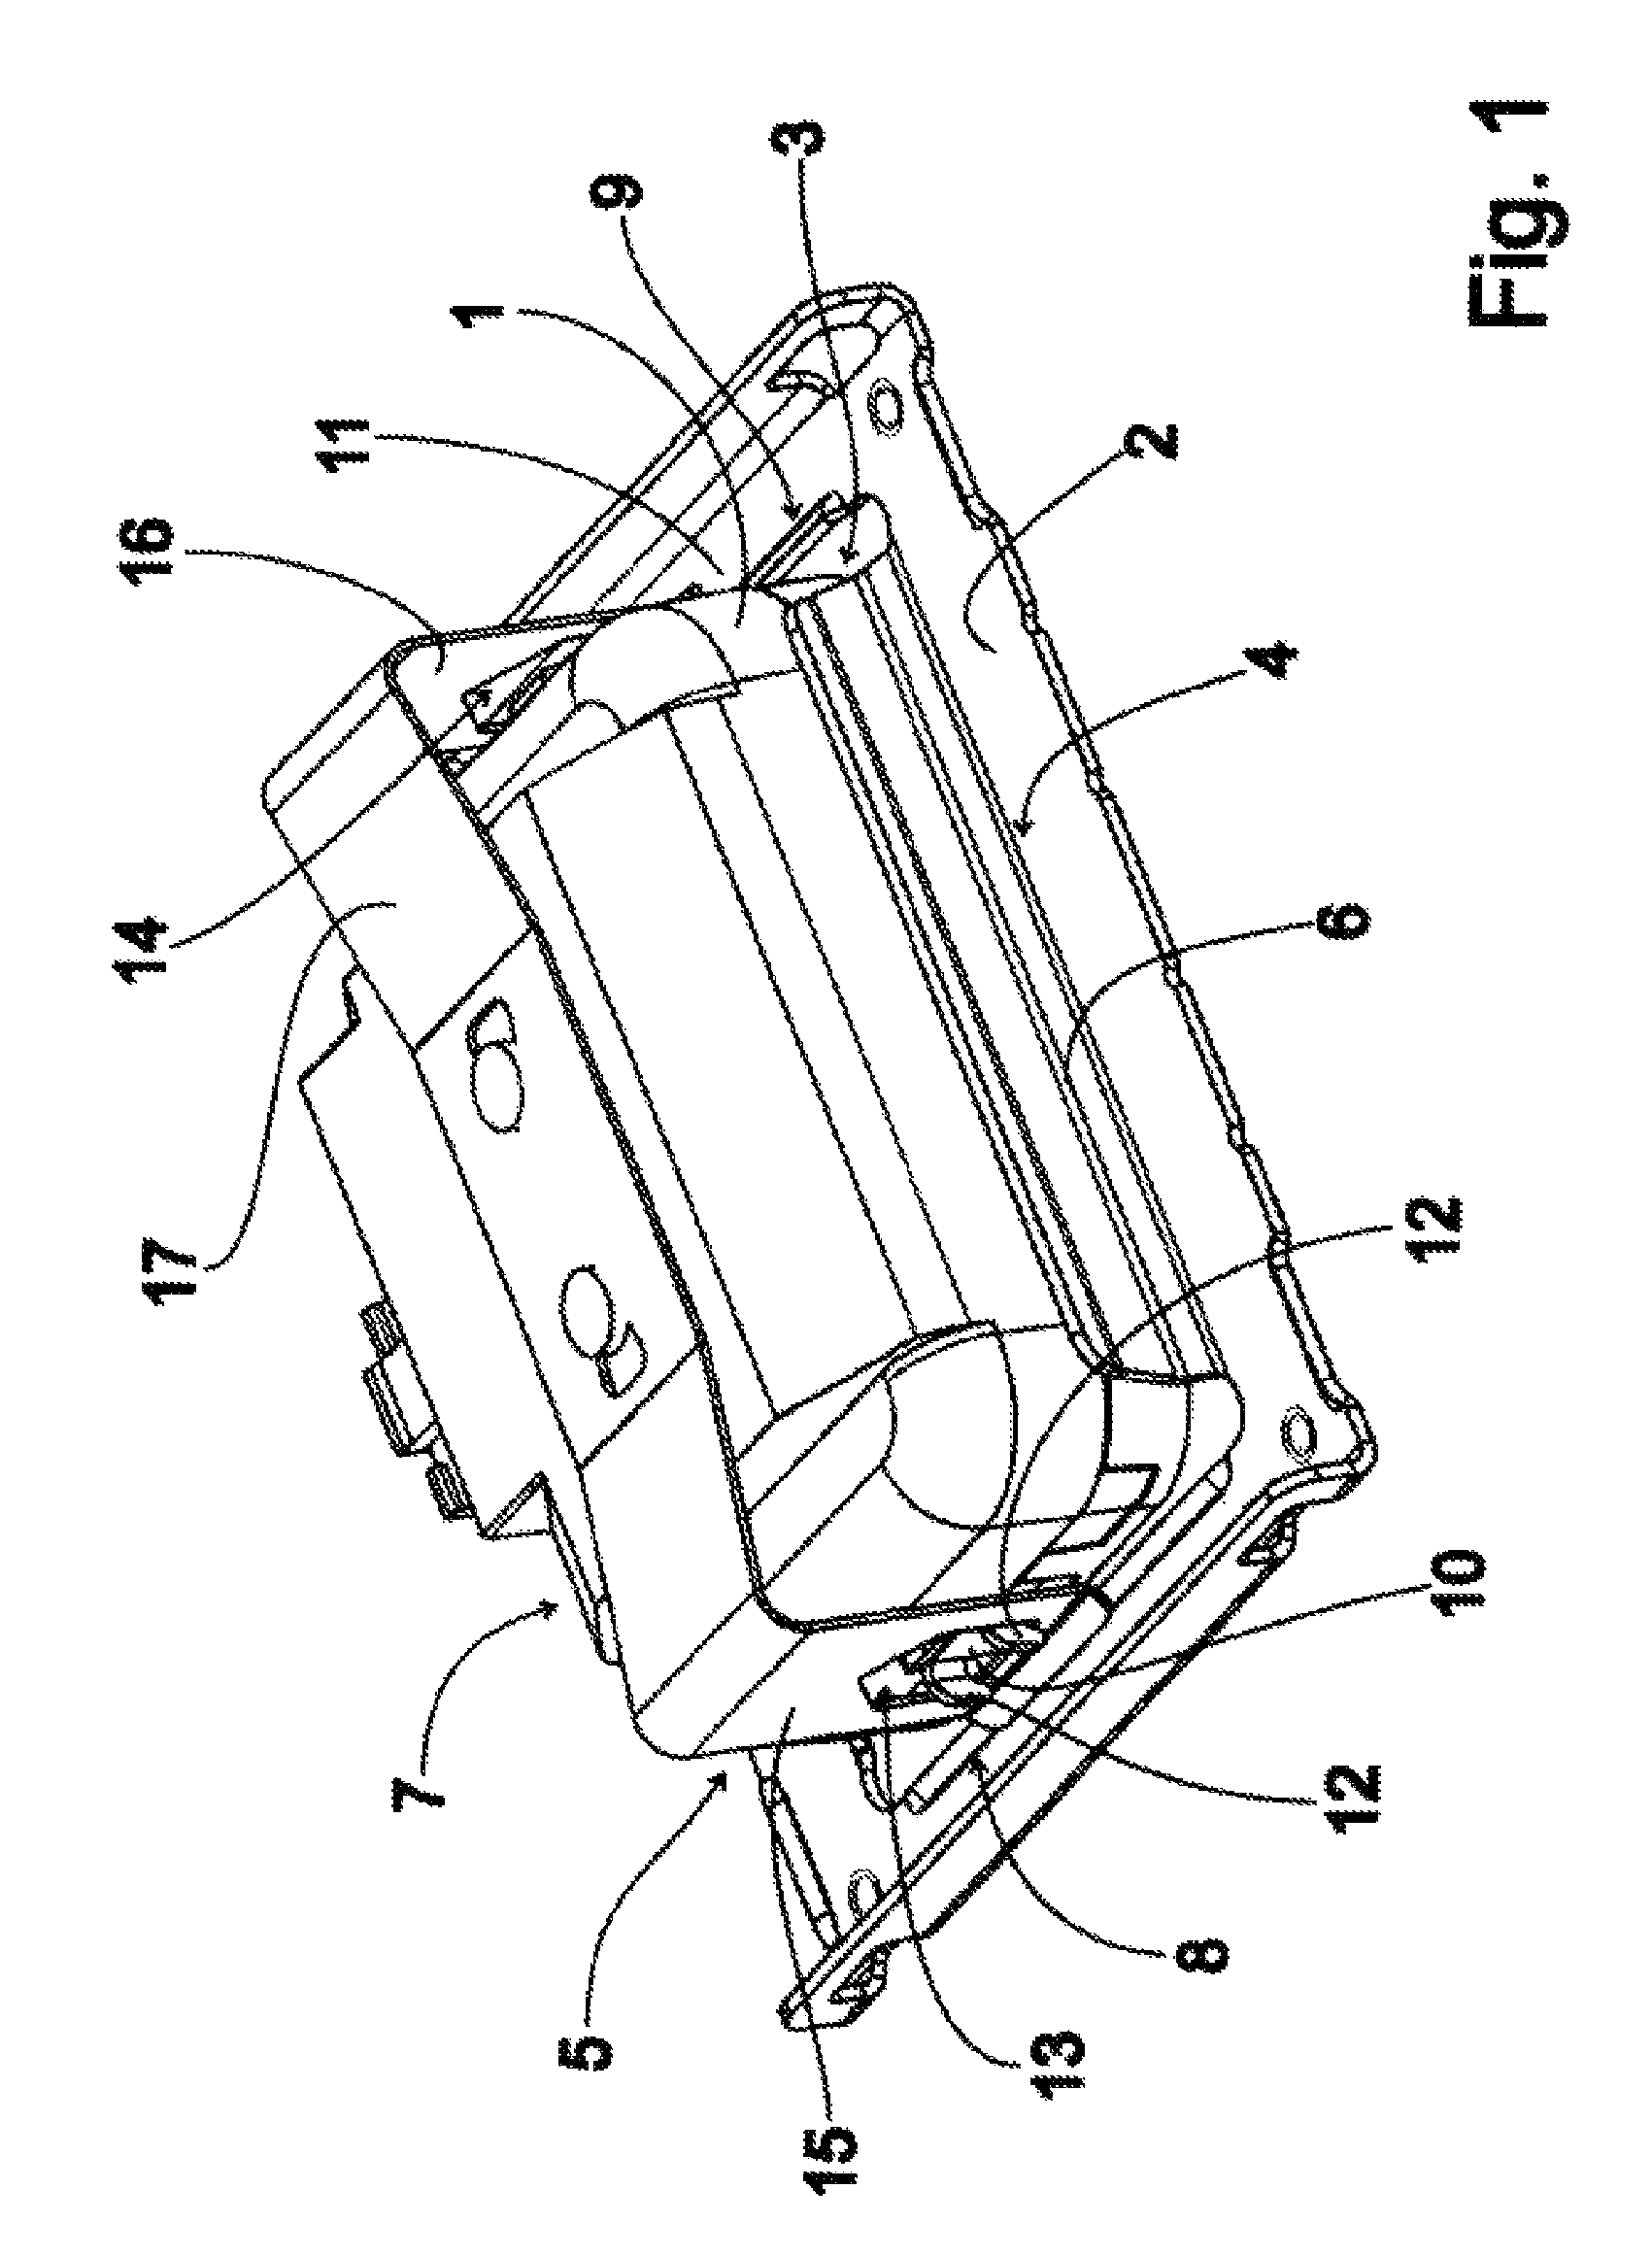 Device for fastening a rectangular sensor to a support part